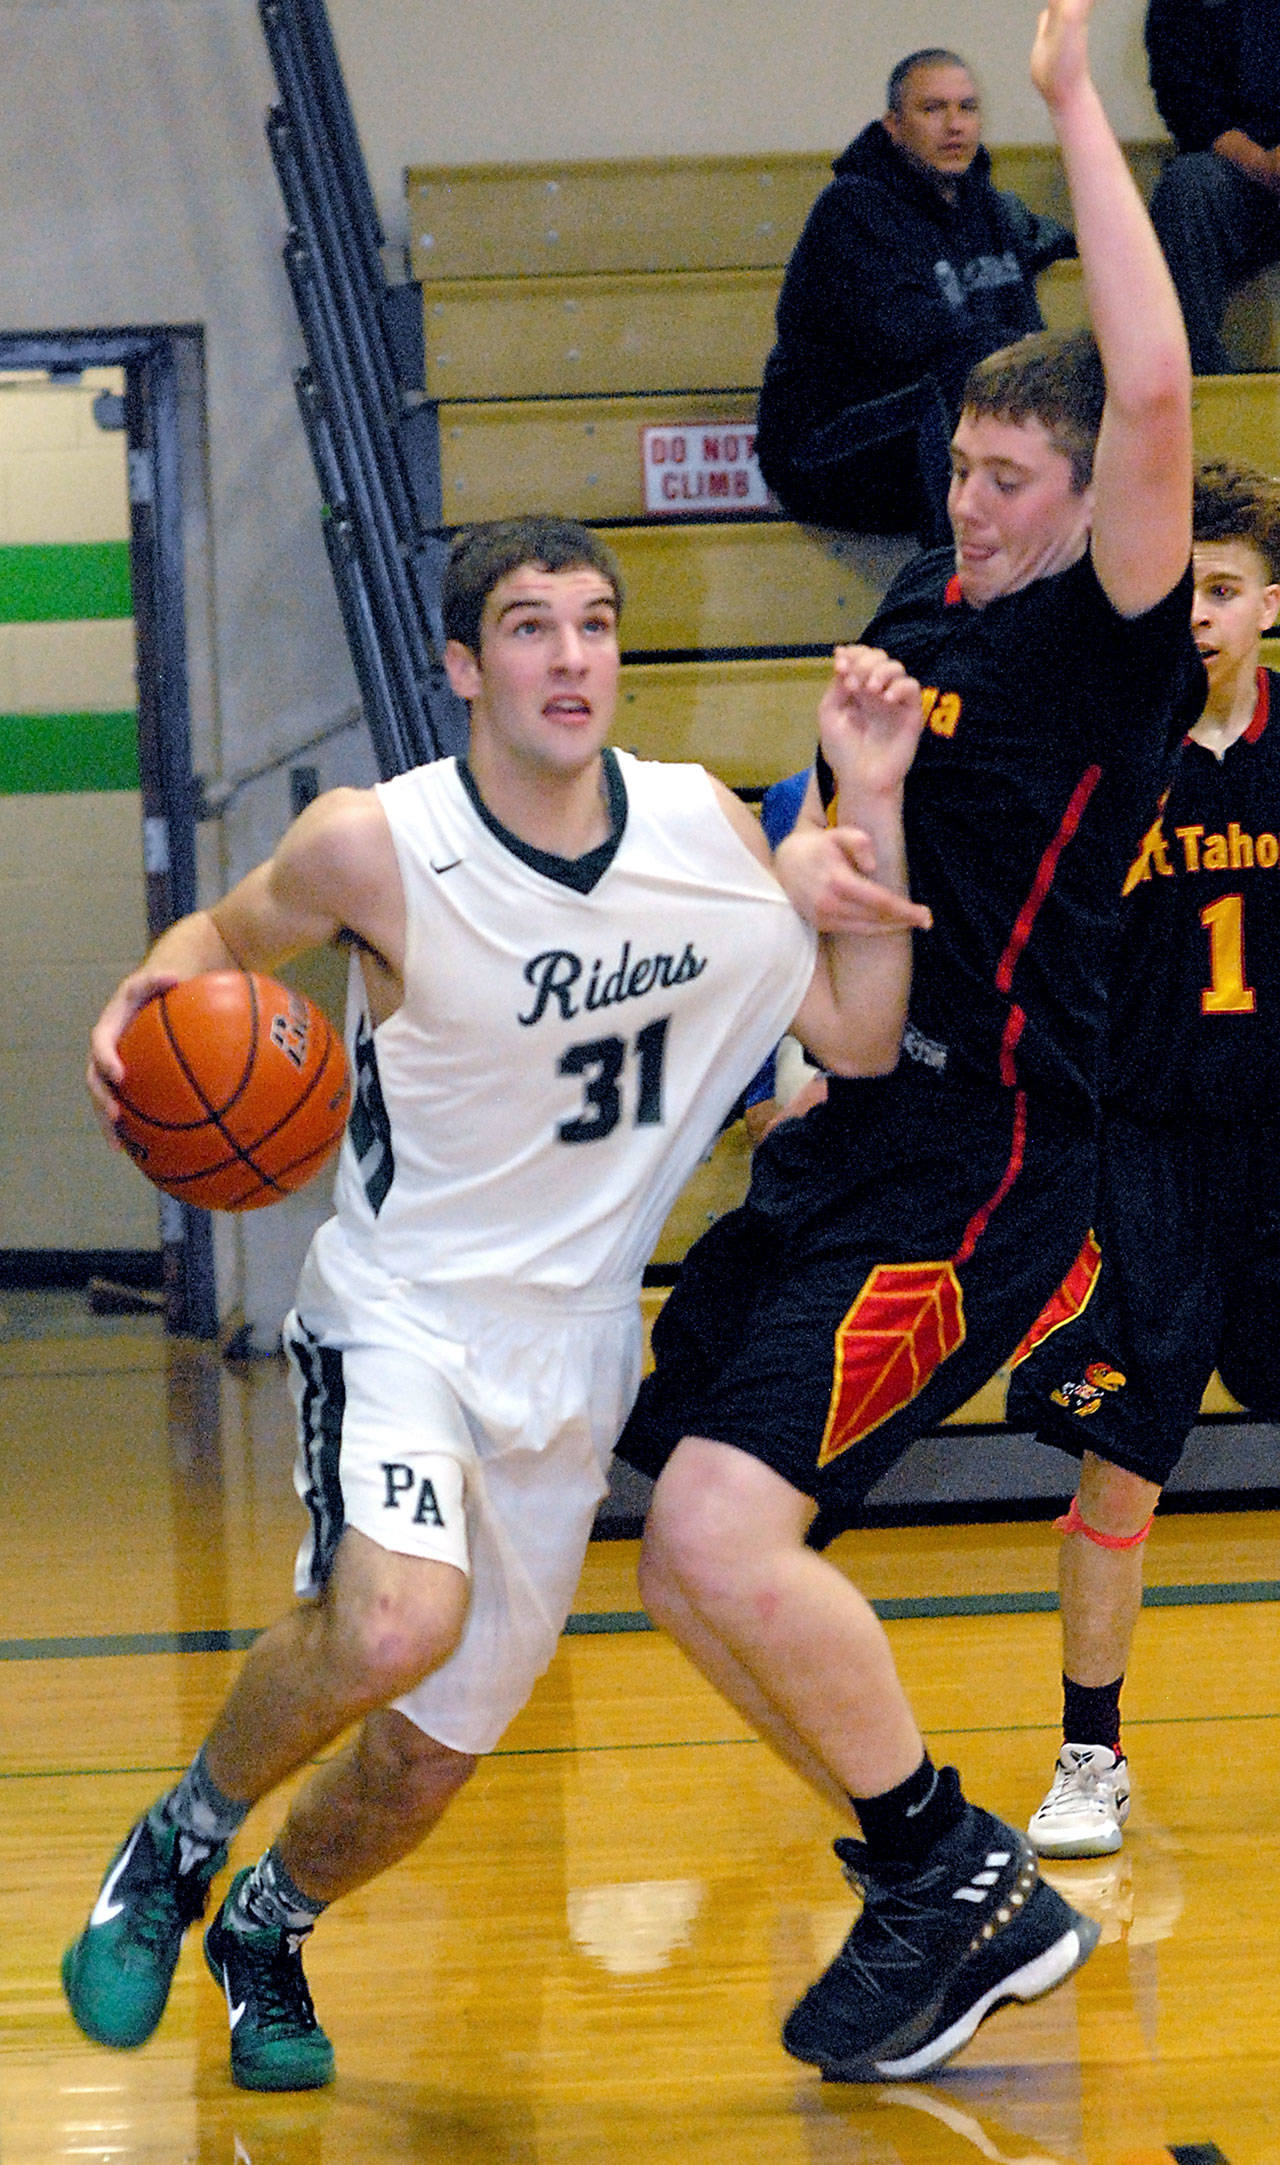 Port Angeles’ Garrett Edwards, left, drives past Mount Tahoma’s Tyler Williford in the first quarter on Friday night at Port Angeles High School. (Keith Thorpe/Peninsula Daily News)